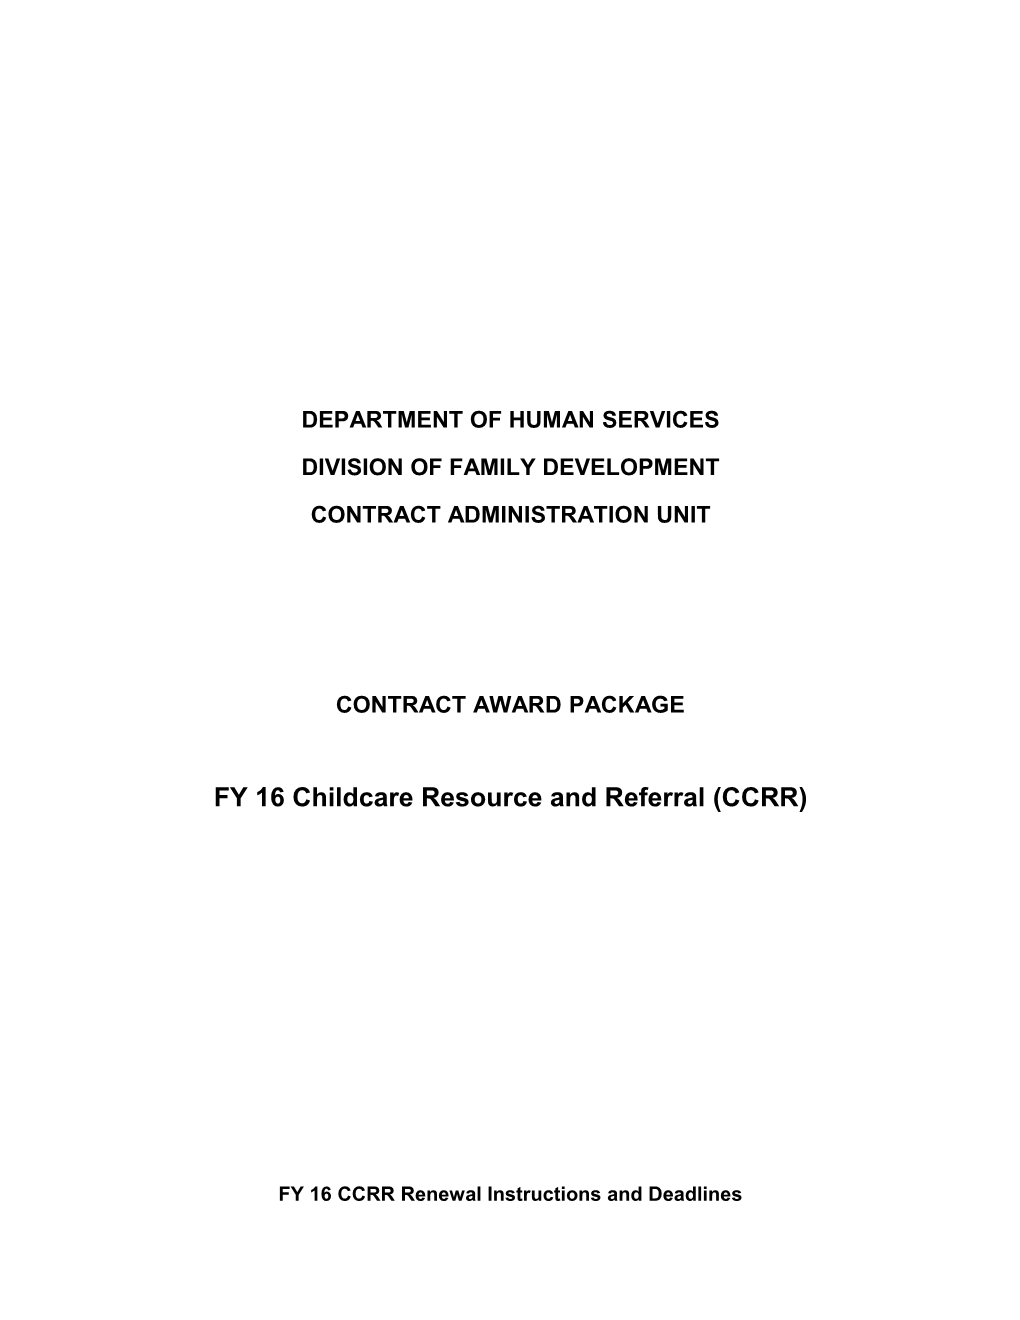 Department of Human Services s4